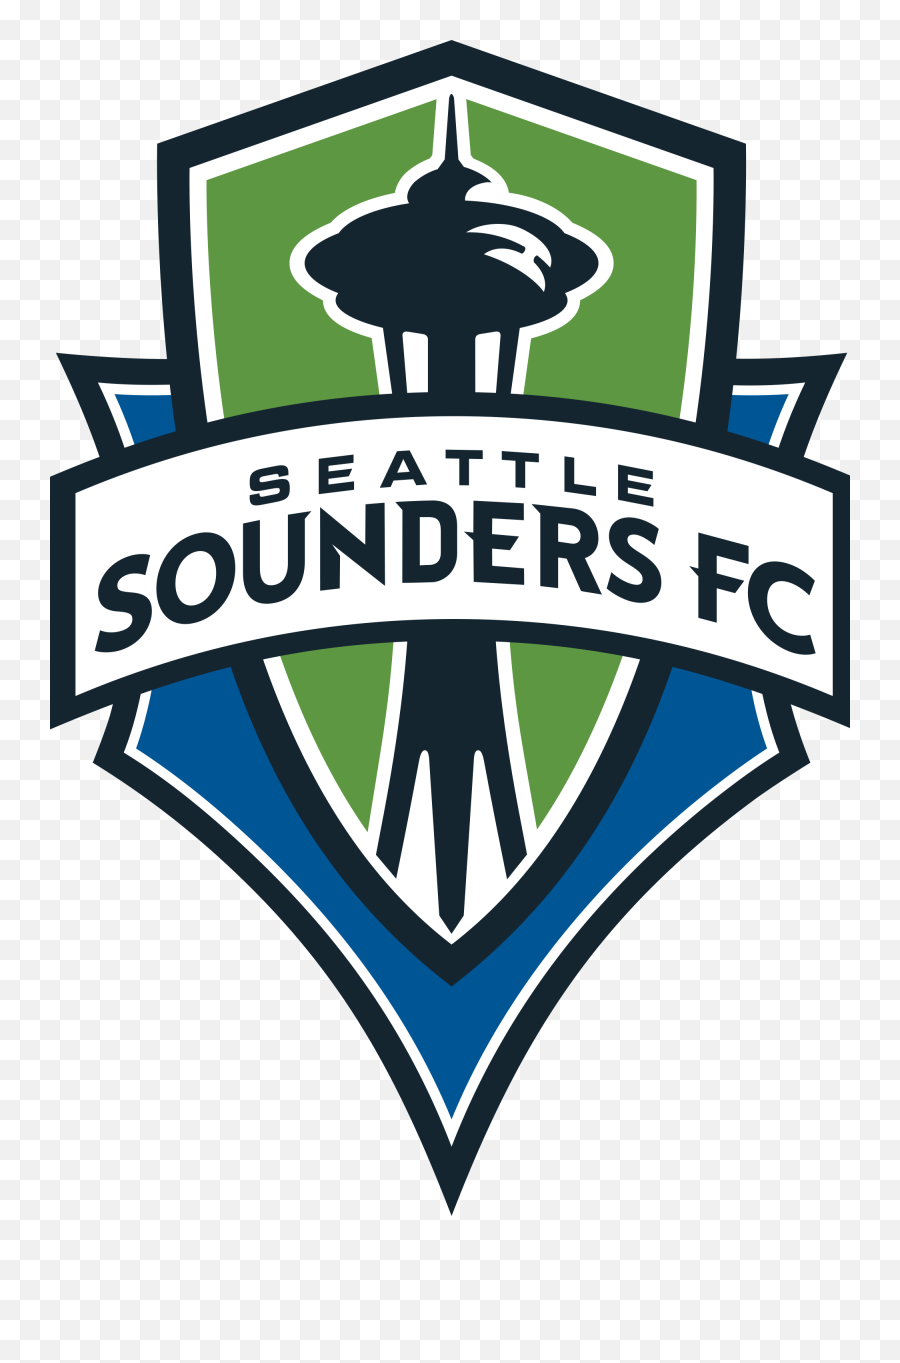 Search For Symbols Being - Seattle Sounders Logo Emoji,Seahawks Emoticons